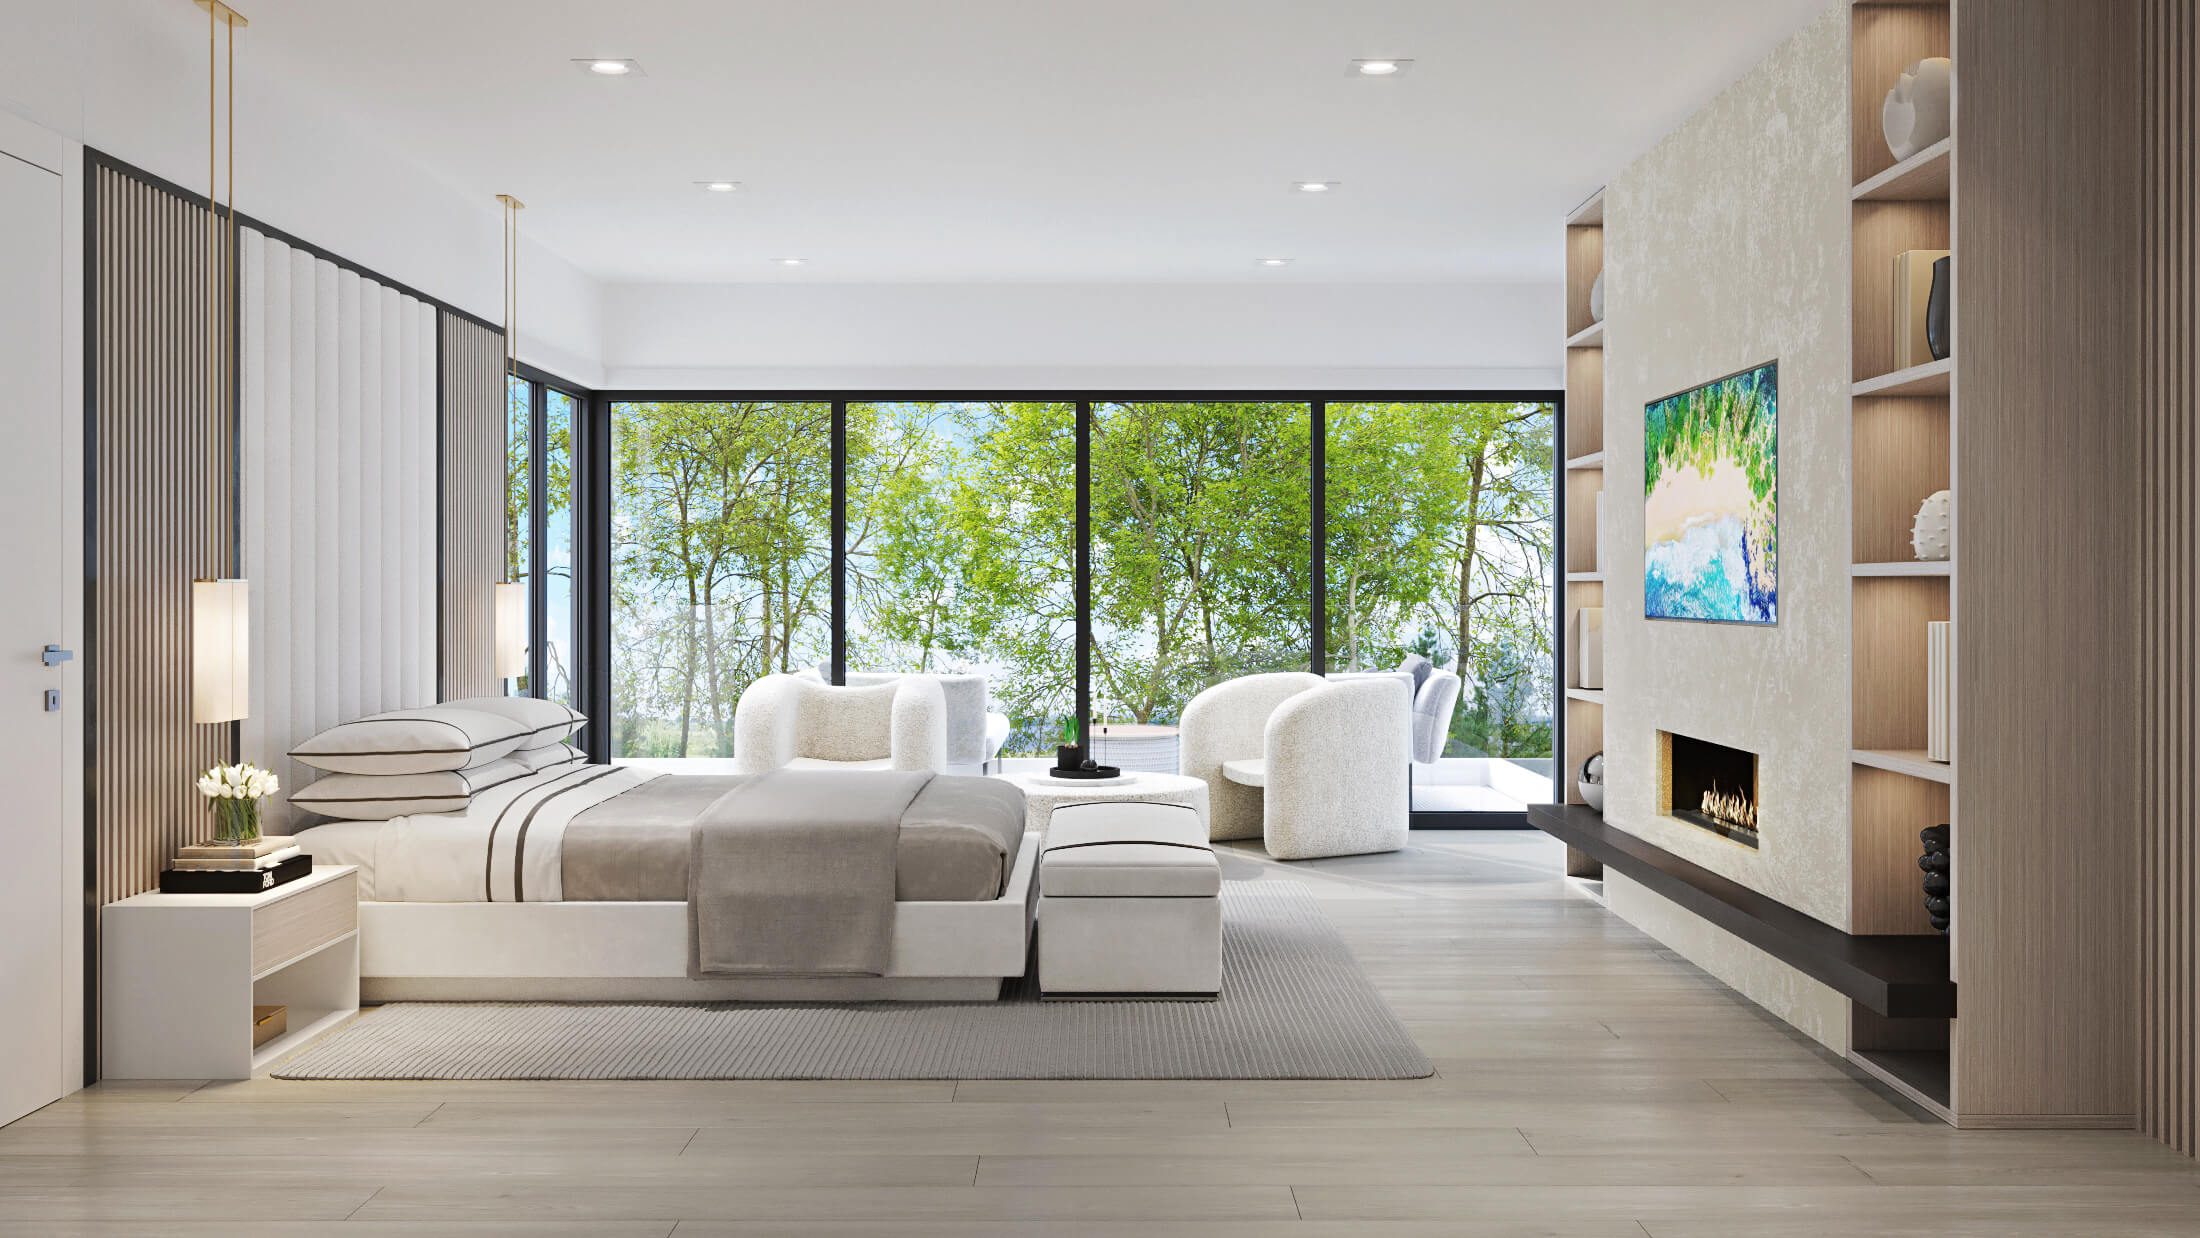 Interior Design Miami Professionals - Best Residential Interior Design Firm with projects internationally and concentrated in the South Florida region.